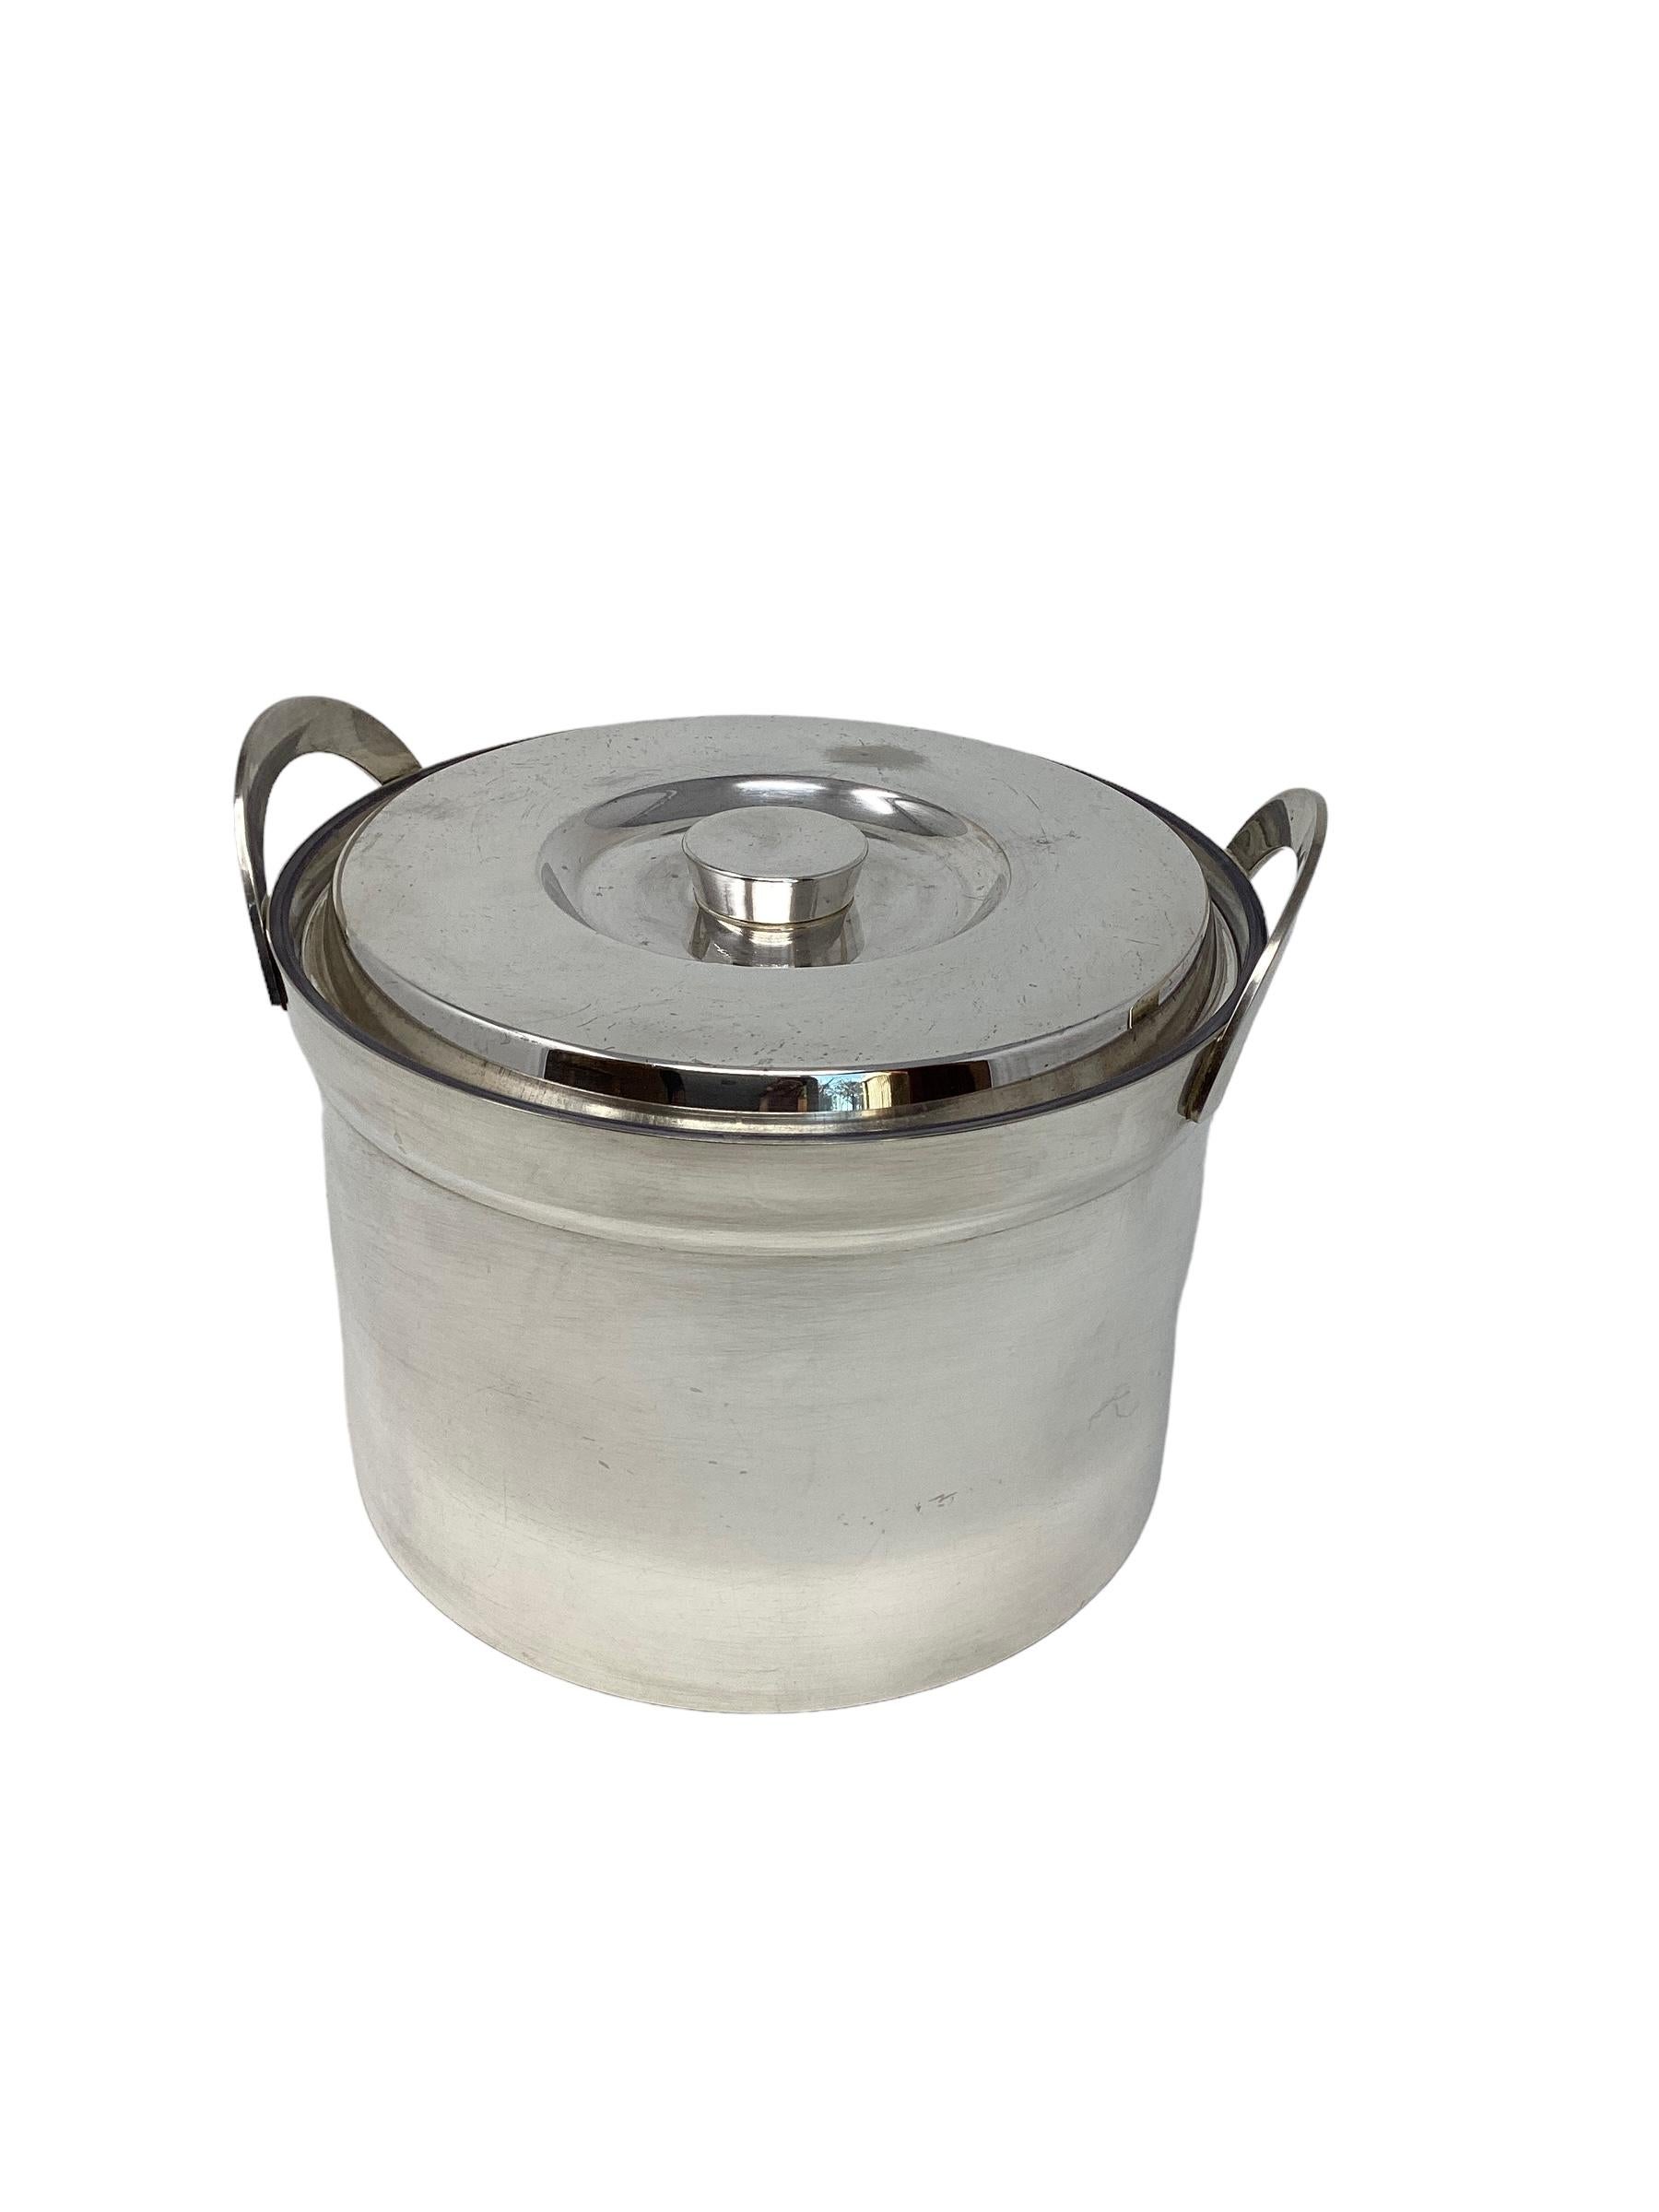 Vintage Mid Century Silver Plate Ice Bucket. In good vintage condition with some wear to the silver plate as shown in images.